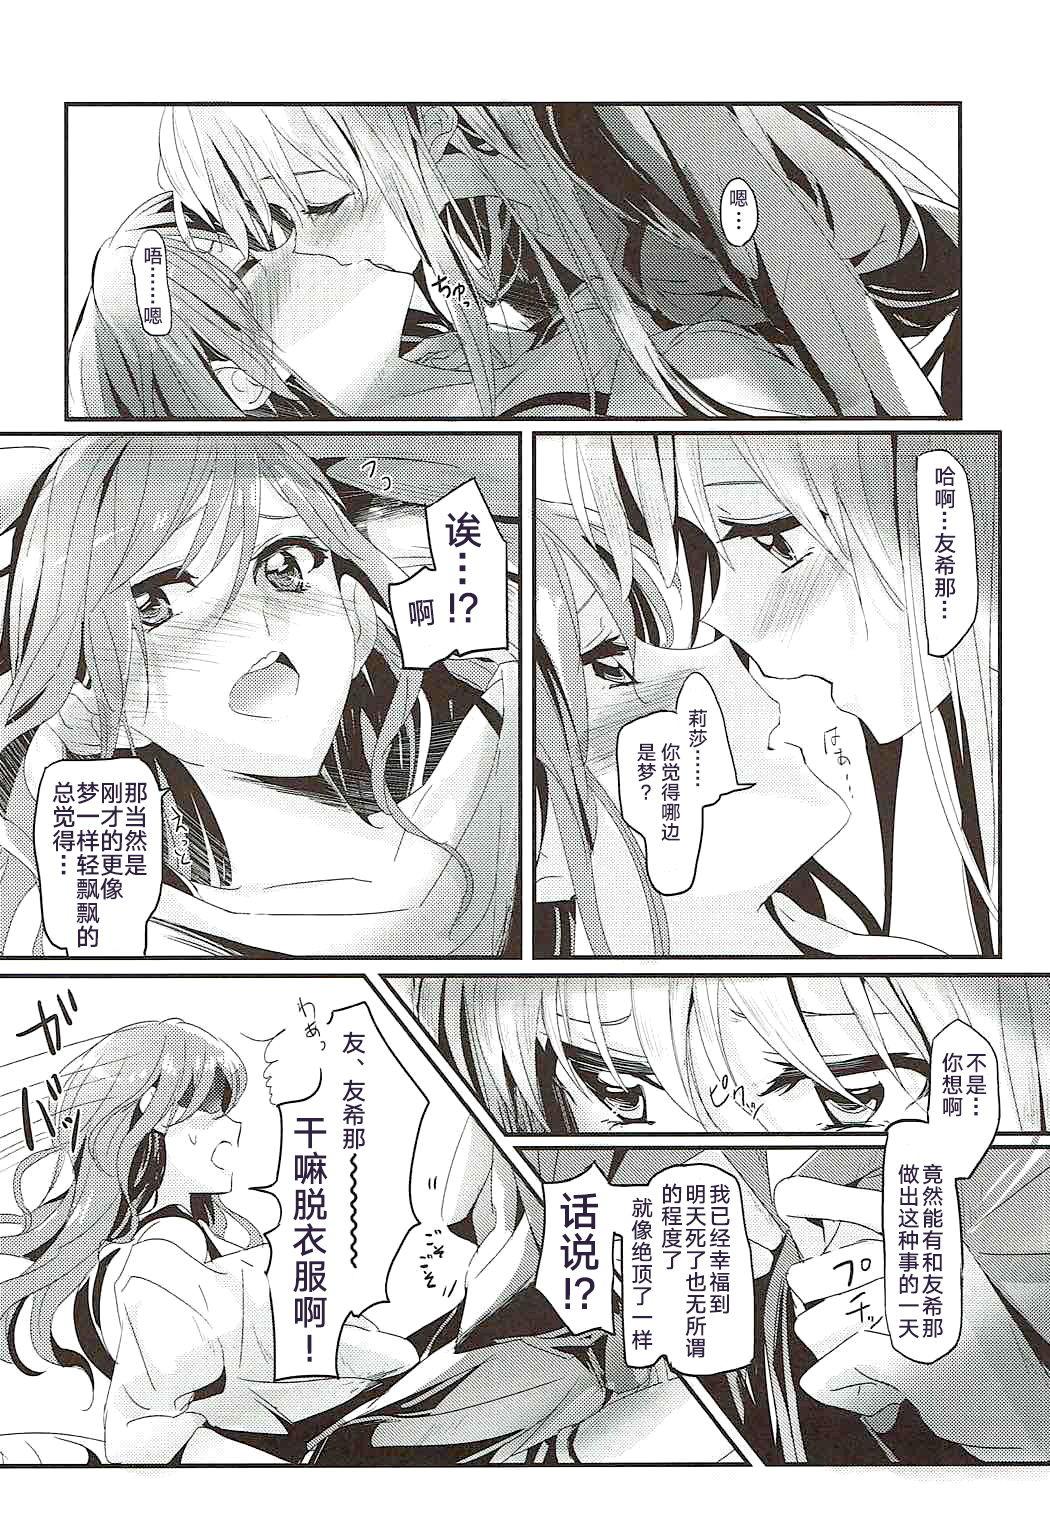 Shoplifter Unstable feelings - Bang dream Fat Pussy - Page 11